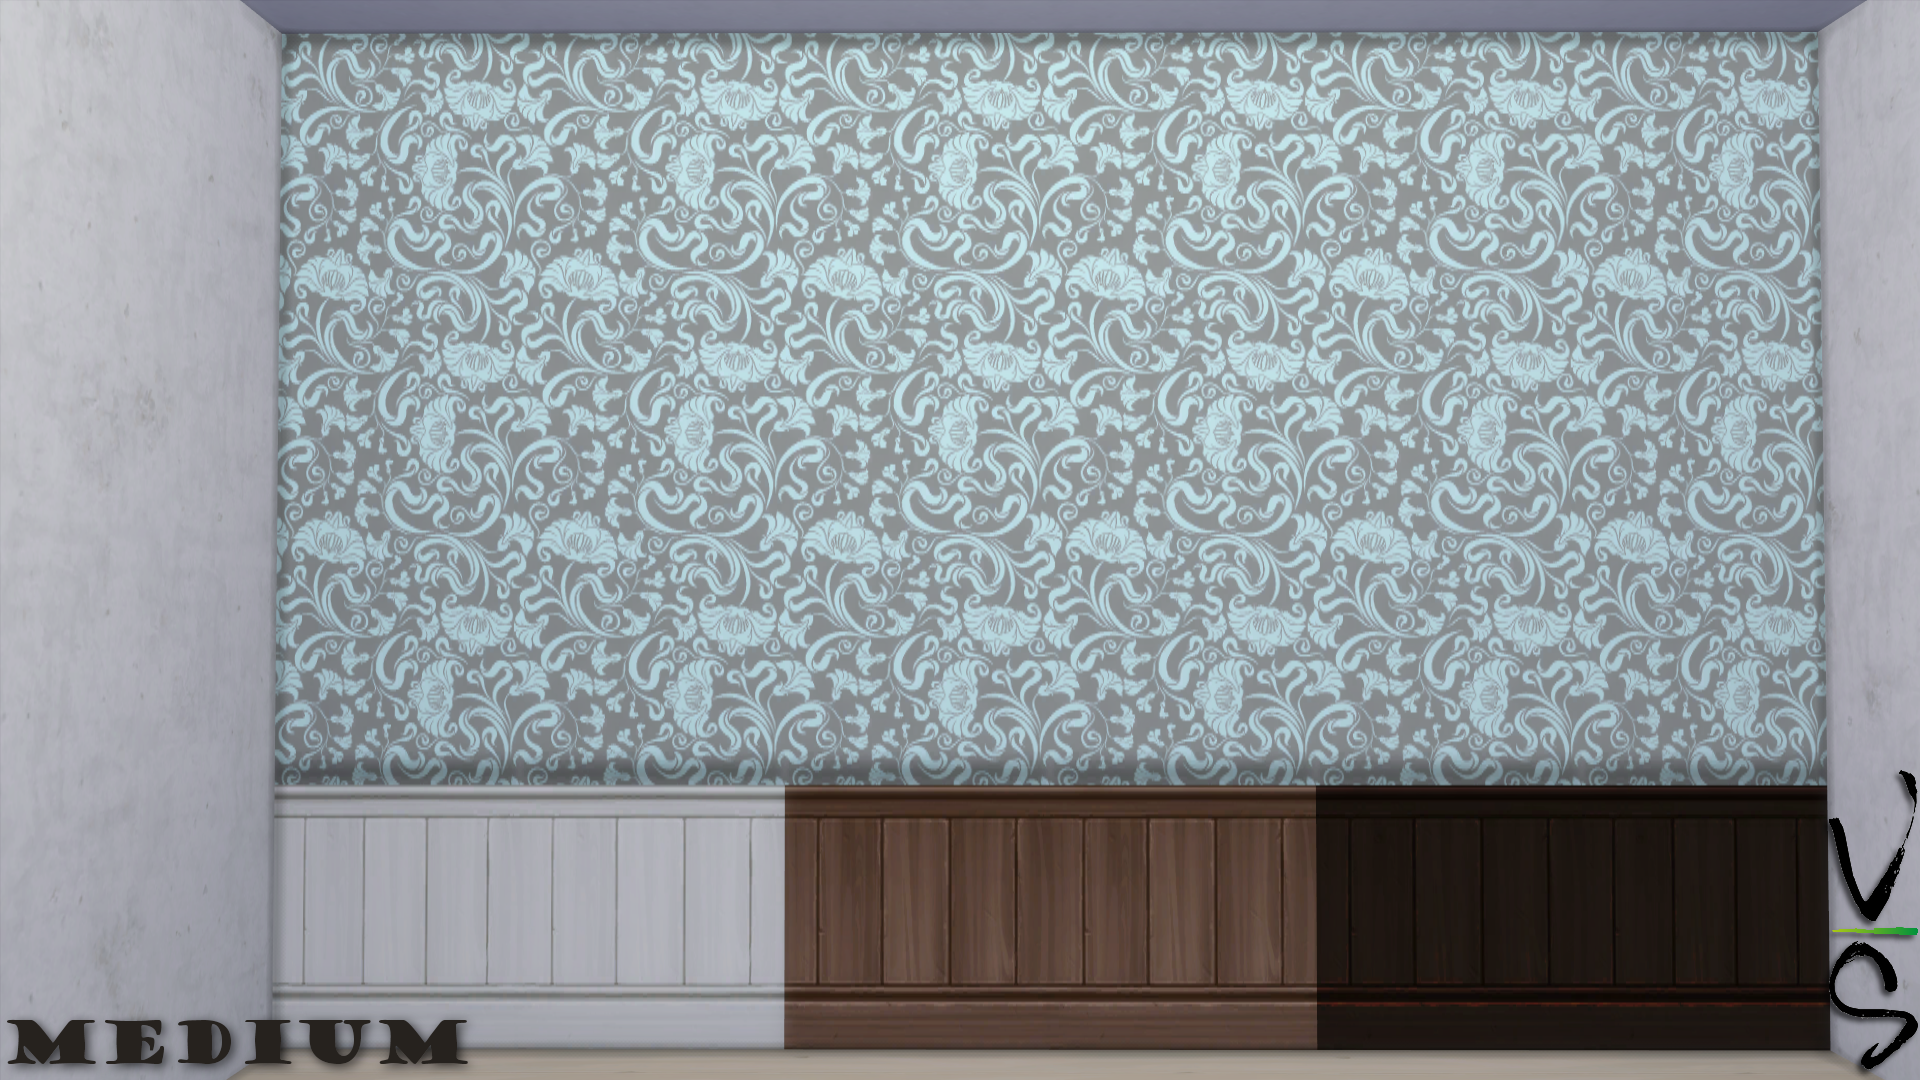 Mod The Sims - Floral Paneling Walls